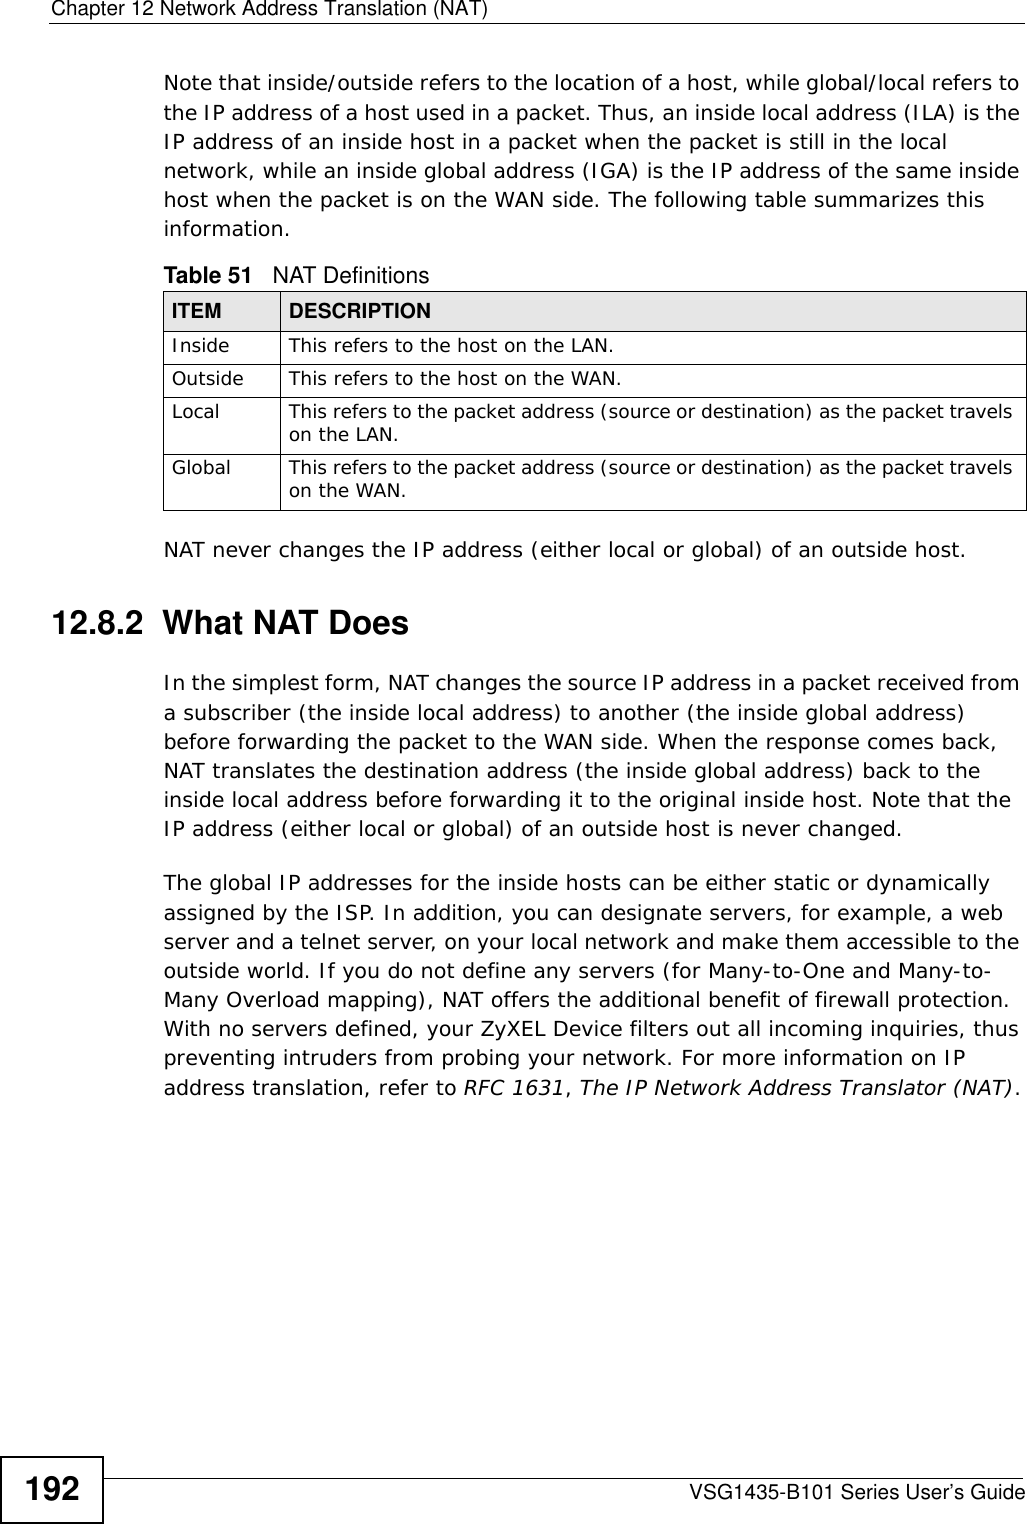 Chapter 12 Network Address Translation (NAT)VSG1435-B101 Series User’s Guide192Note that inside/outside refers to the location of a host, while global/local refers to the IP address of a host used in a packet. Thus, an inside local address (ILA) is the IP address of an inside host in a packet when the packet is still in the local network, while an inside global address (IGA) is the IP address of the same inside host when the packet is on the WAN side. The following table summarizes this information.NAT never changes the IP address (either local or global) of an outside host.12.8.2  What NAT DoesIn the simplest form, NAT changes the source IP address in a packet received from a subscriber (the inside local address) to another (the inside global address) before forwarding the packet to the WAN side. When the response comes back, NAT translates the destination address (the inside global address) back to the inside local address before forwarding it to the original inside host. Note that the IP address (either local or global) of an outside host is never changed.The global IP addresses for the inside hosts can be either static or dynamically assigned by the ISP. In addition, you can designate servers, for example, a web server and a telnet server, on your local network and make them accessible to the outside world. If you do not define any servers (for Many-to-One and Many-to-Many Overload mapping), NAT offers the additional benefit of firewall protection. With no servers defined, your ZyXEL Device filters out all incoming inquiries, thus preventing intruders from probing your network. For more information on IP address translation, refer to RFC 1631, The IP Network Address Translator (NAT).Table 51   NAT DefinitionsITEM DESCRIPTIONInside This refers to the host on the LAN.Outside This refers to the host on the WAN.Local This refers to the packet address (source or destination) as the packet travels on the LAN.Global This refers to the packet address (source or destination) as the packet travels on the WAN.